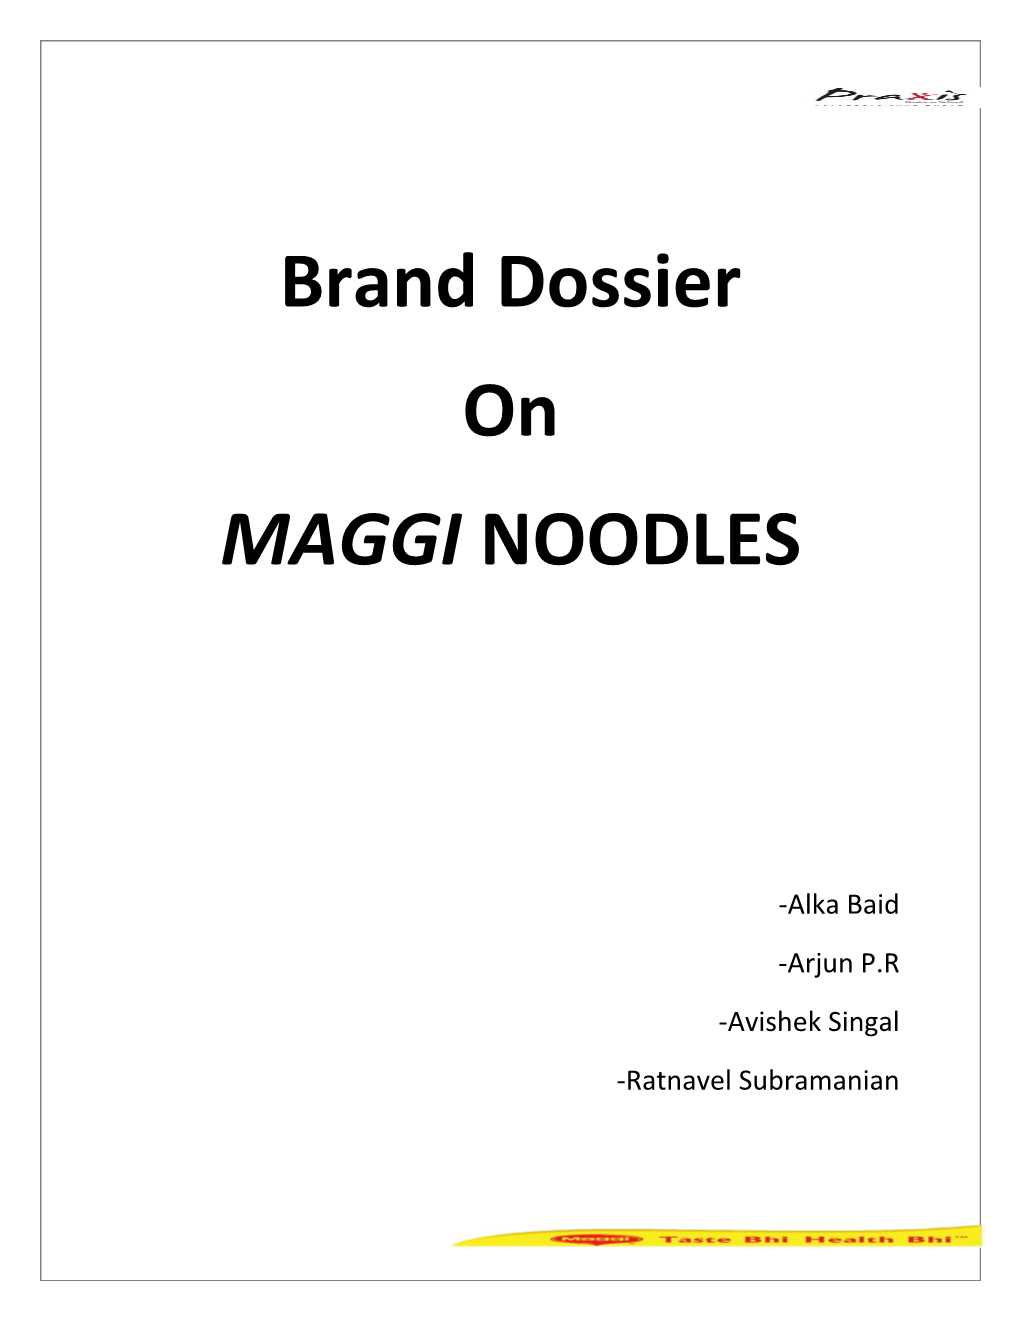 Initial Positioning and Subsequent Repositioning of Maggi Noodles